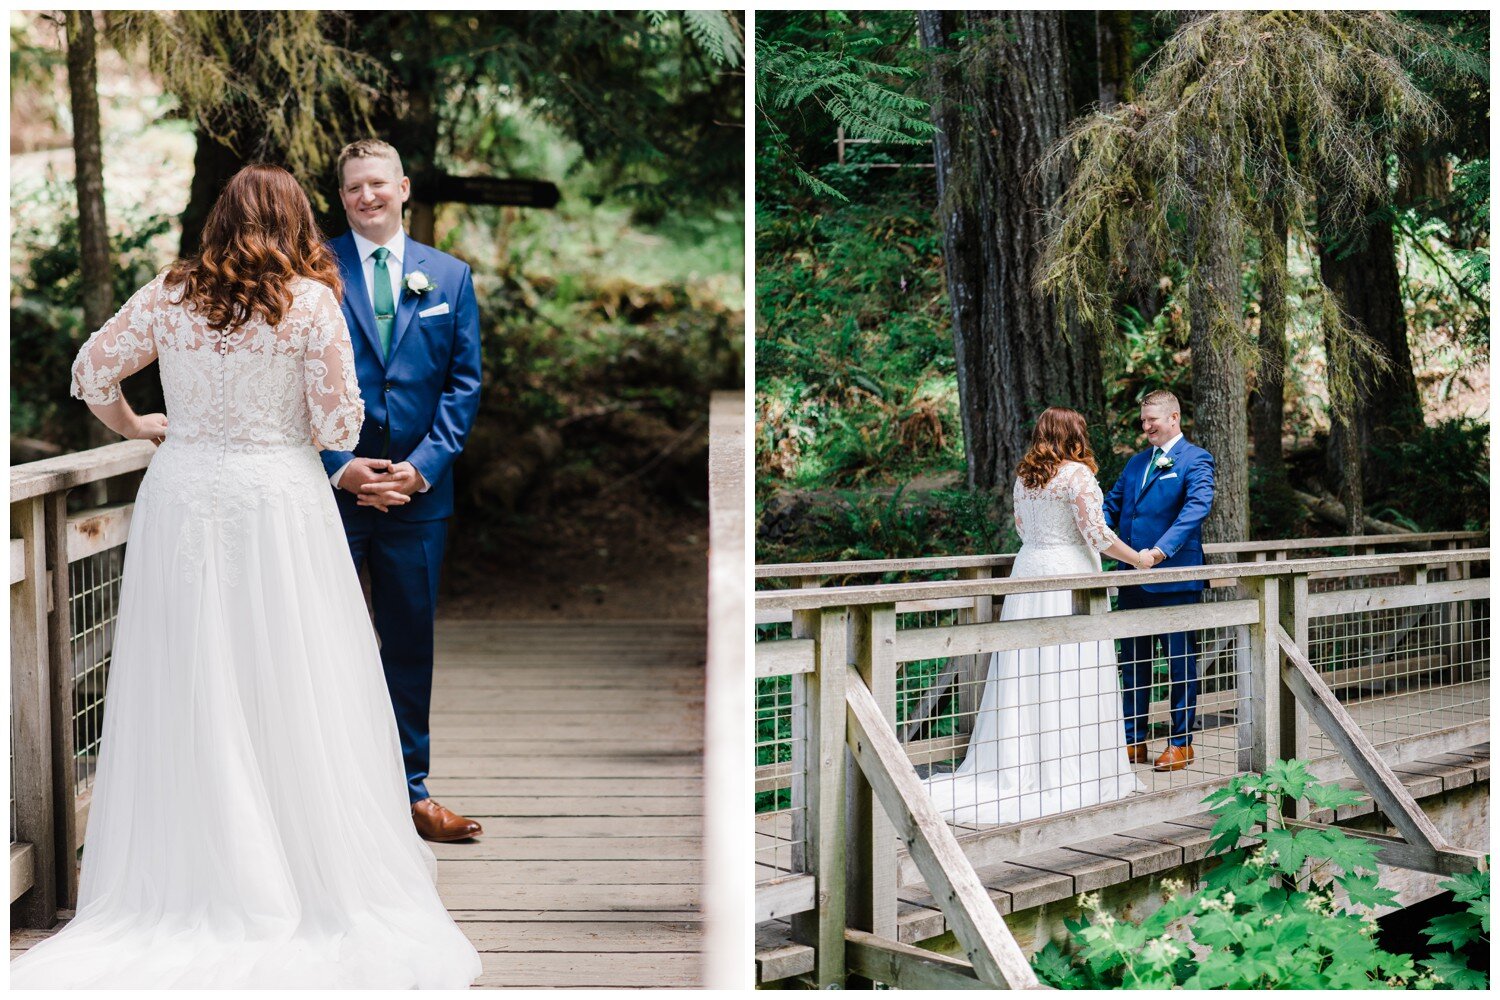 Bride and groom first look in the forest at Alderbrook Resort